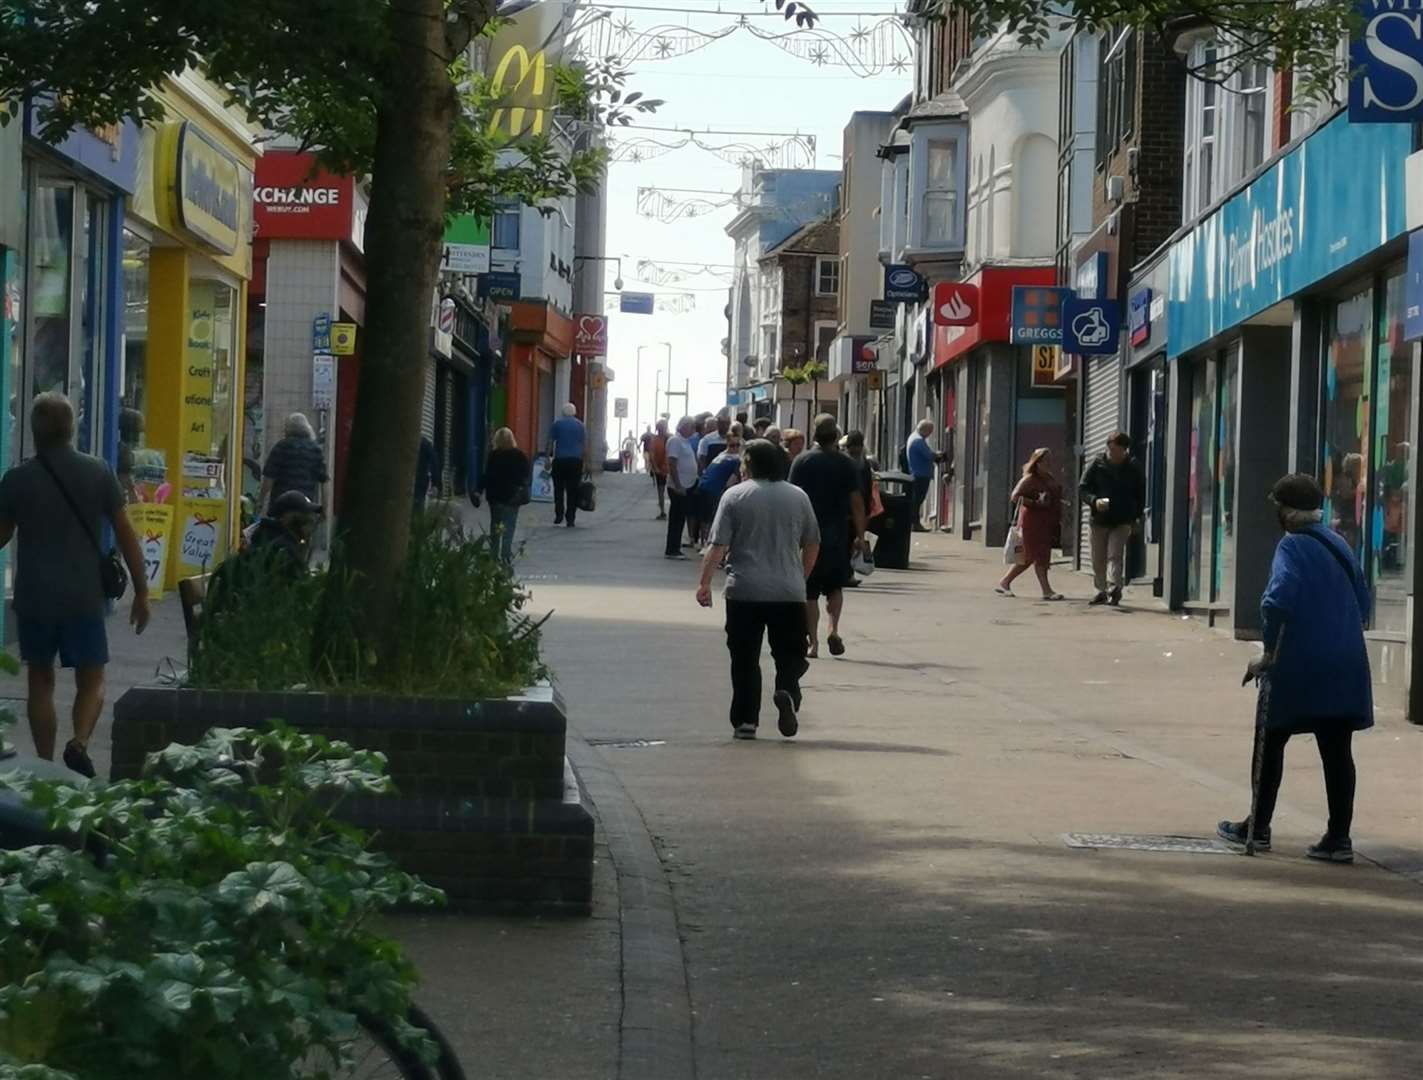 The incident happened in Margate High Street